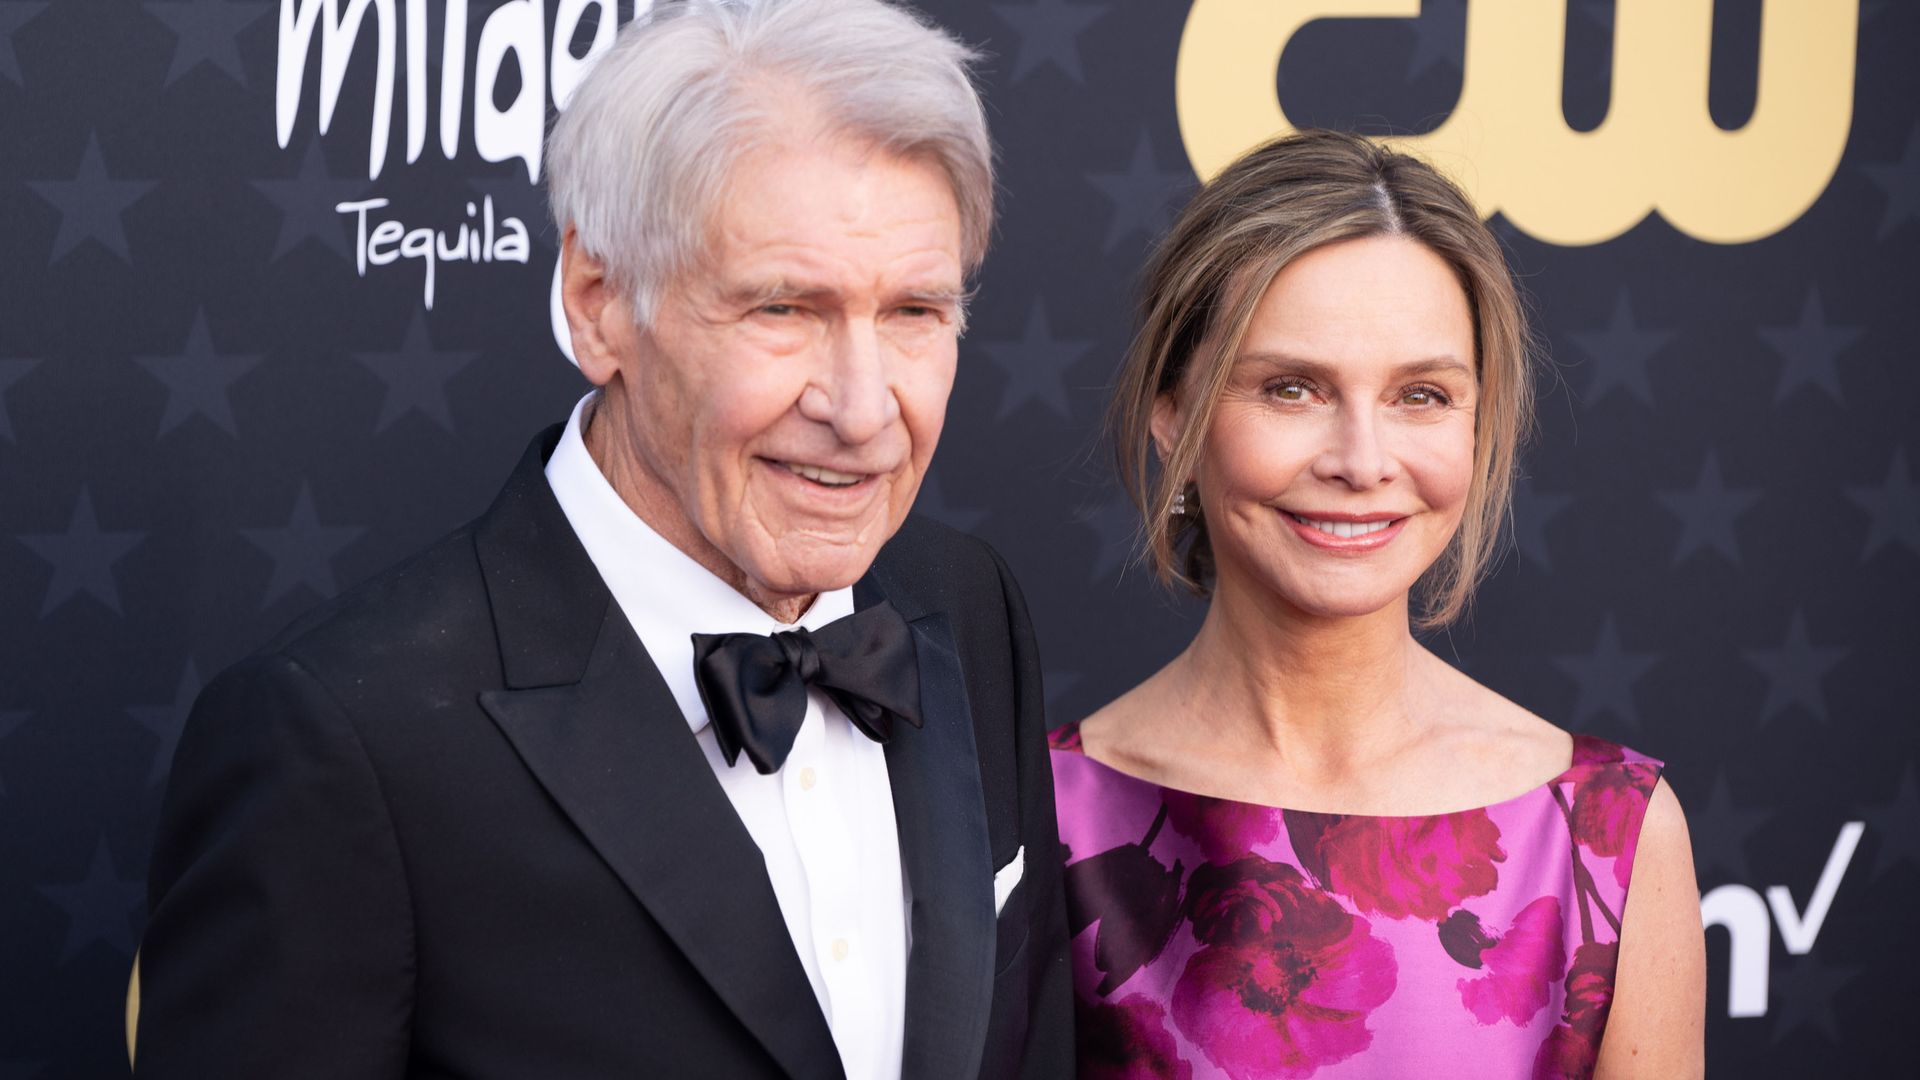 Harrison Ford's wife Calista Flockhart, 59, dazzles in figure-hugging suit during Emmy red carpet appearance